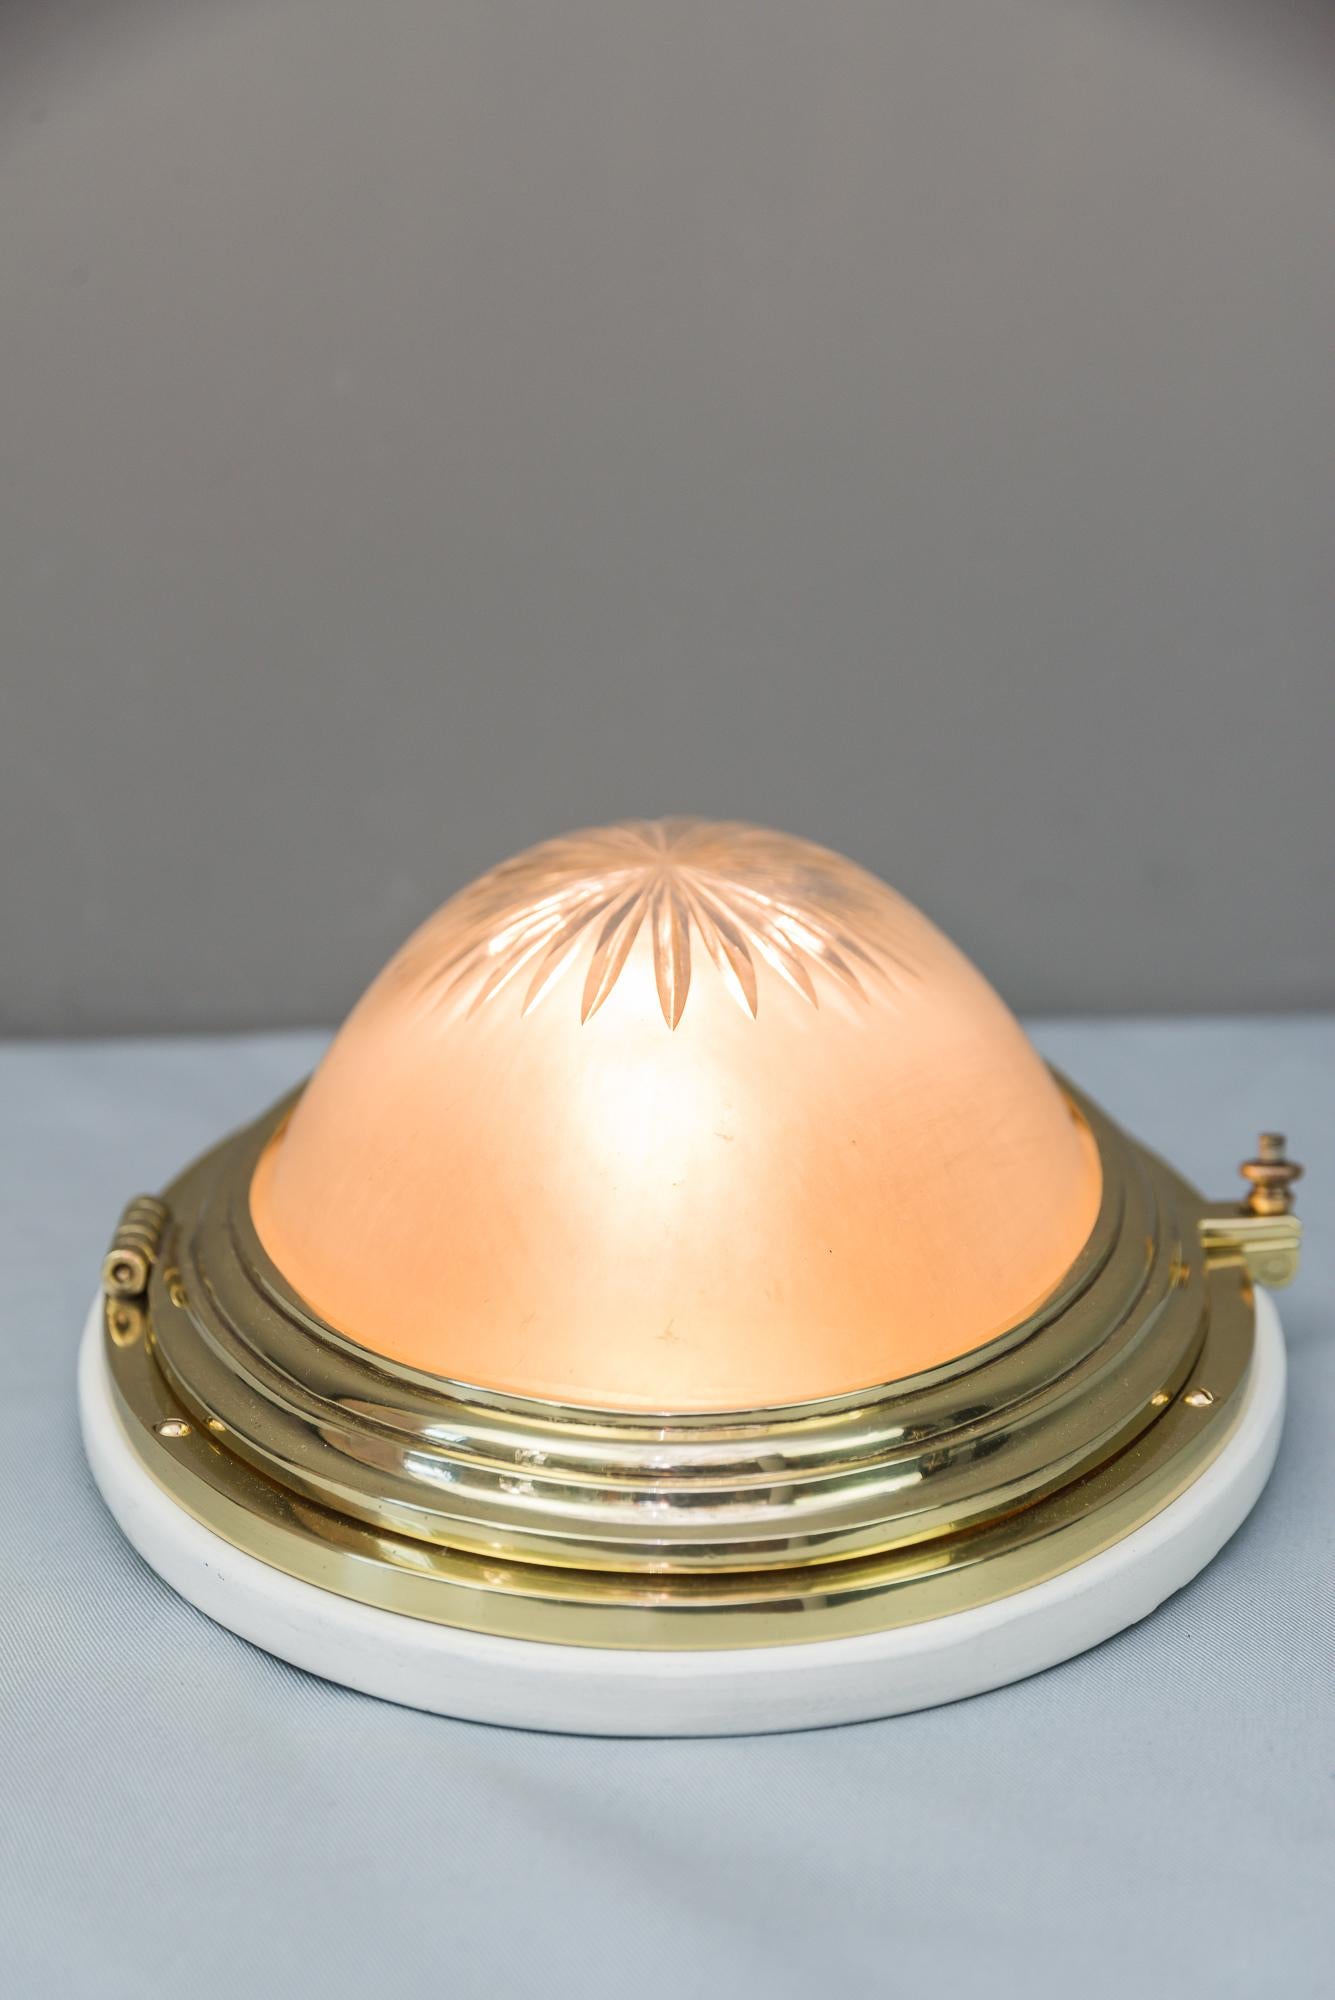 Oval Art Deco Ceiling Lamp with Original Cut Glass and Wood Plate For Sale 1